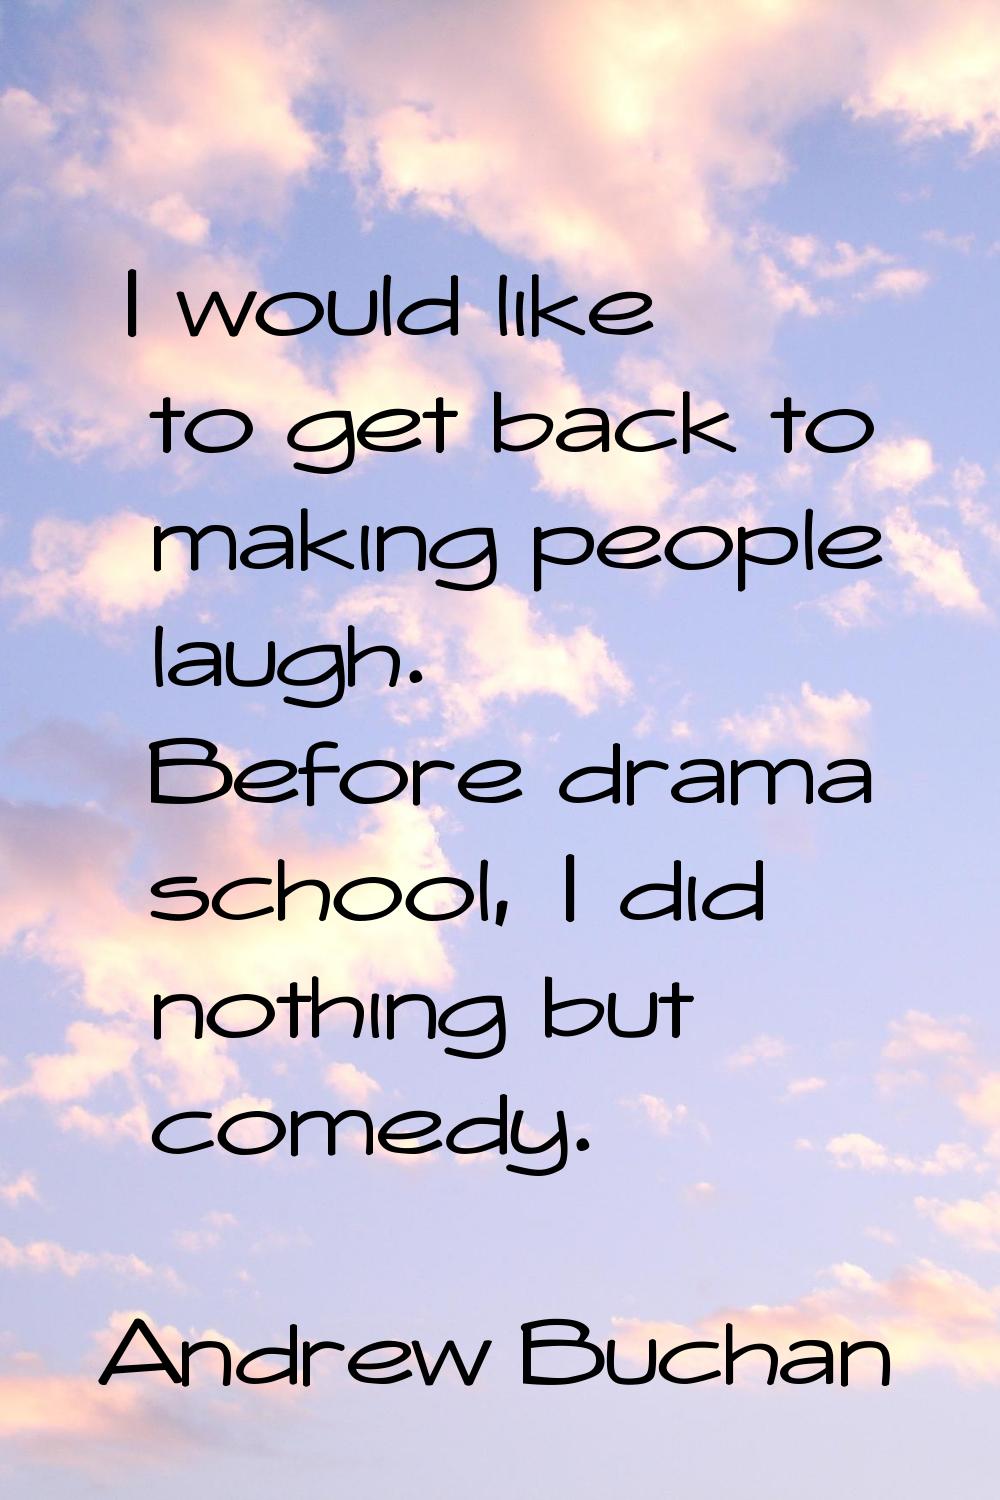 I would like to get back to making people laugh. Before drama school, I did nothing but comedy.